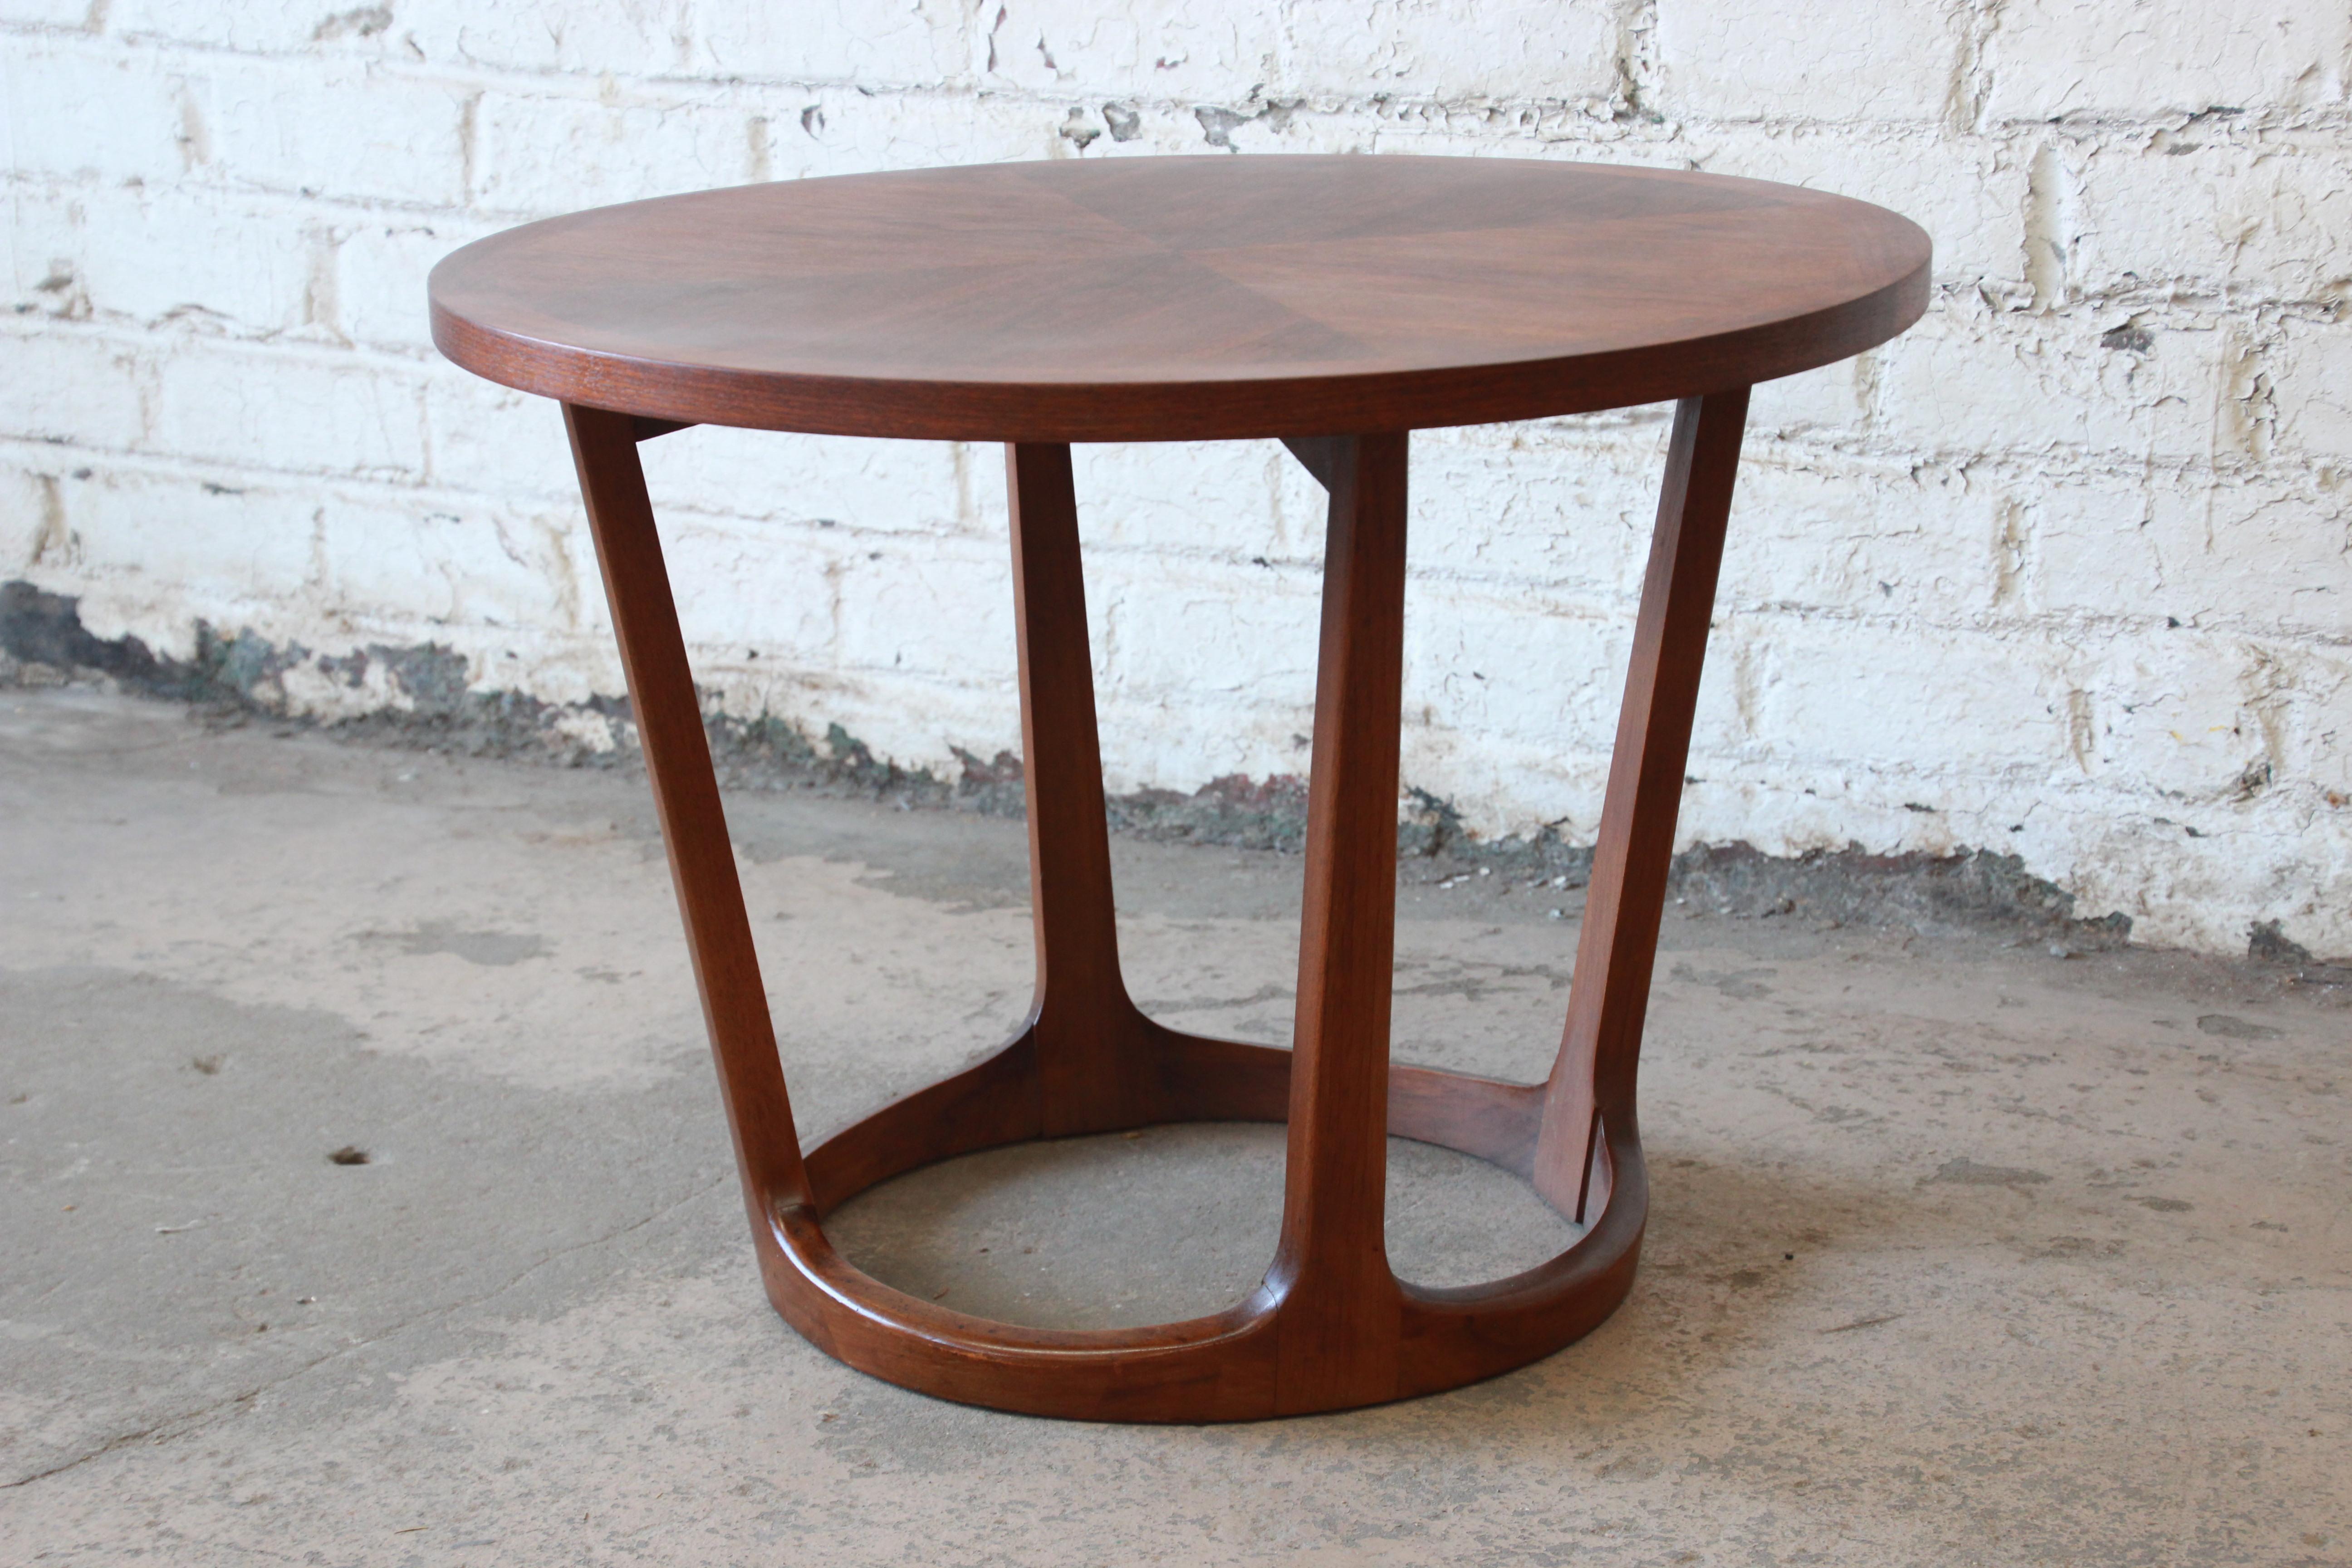 A gorgeous Mid-Century Modern Adrian Pearsall style sculpted walnut side table by Lane Furniture. The table features a solid sculpted walnut base and a beautiful inlaid walnut top. The top has been professionally refinished, and the original Lane